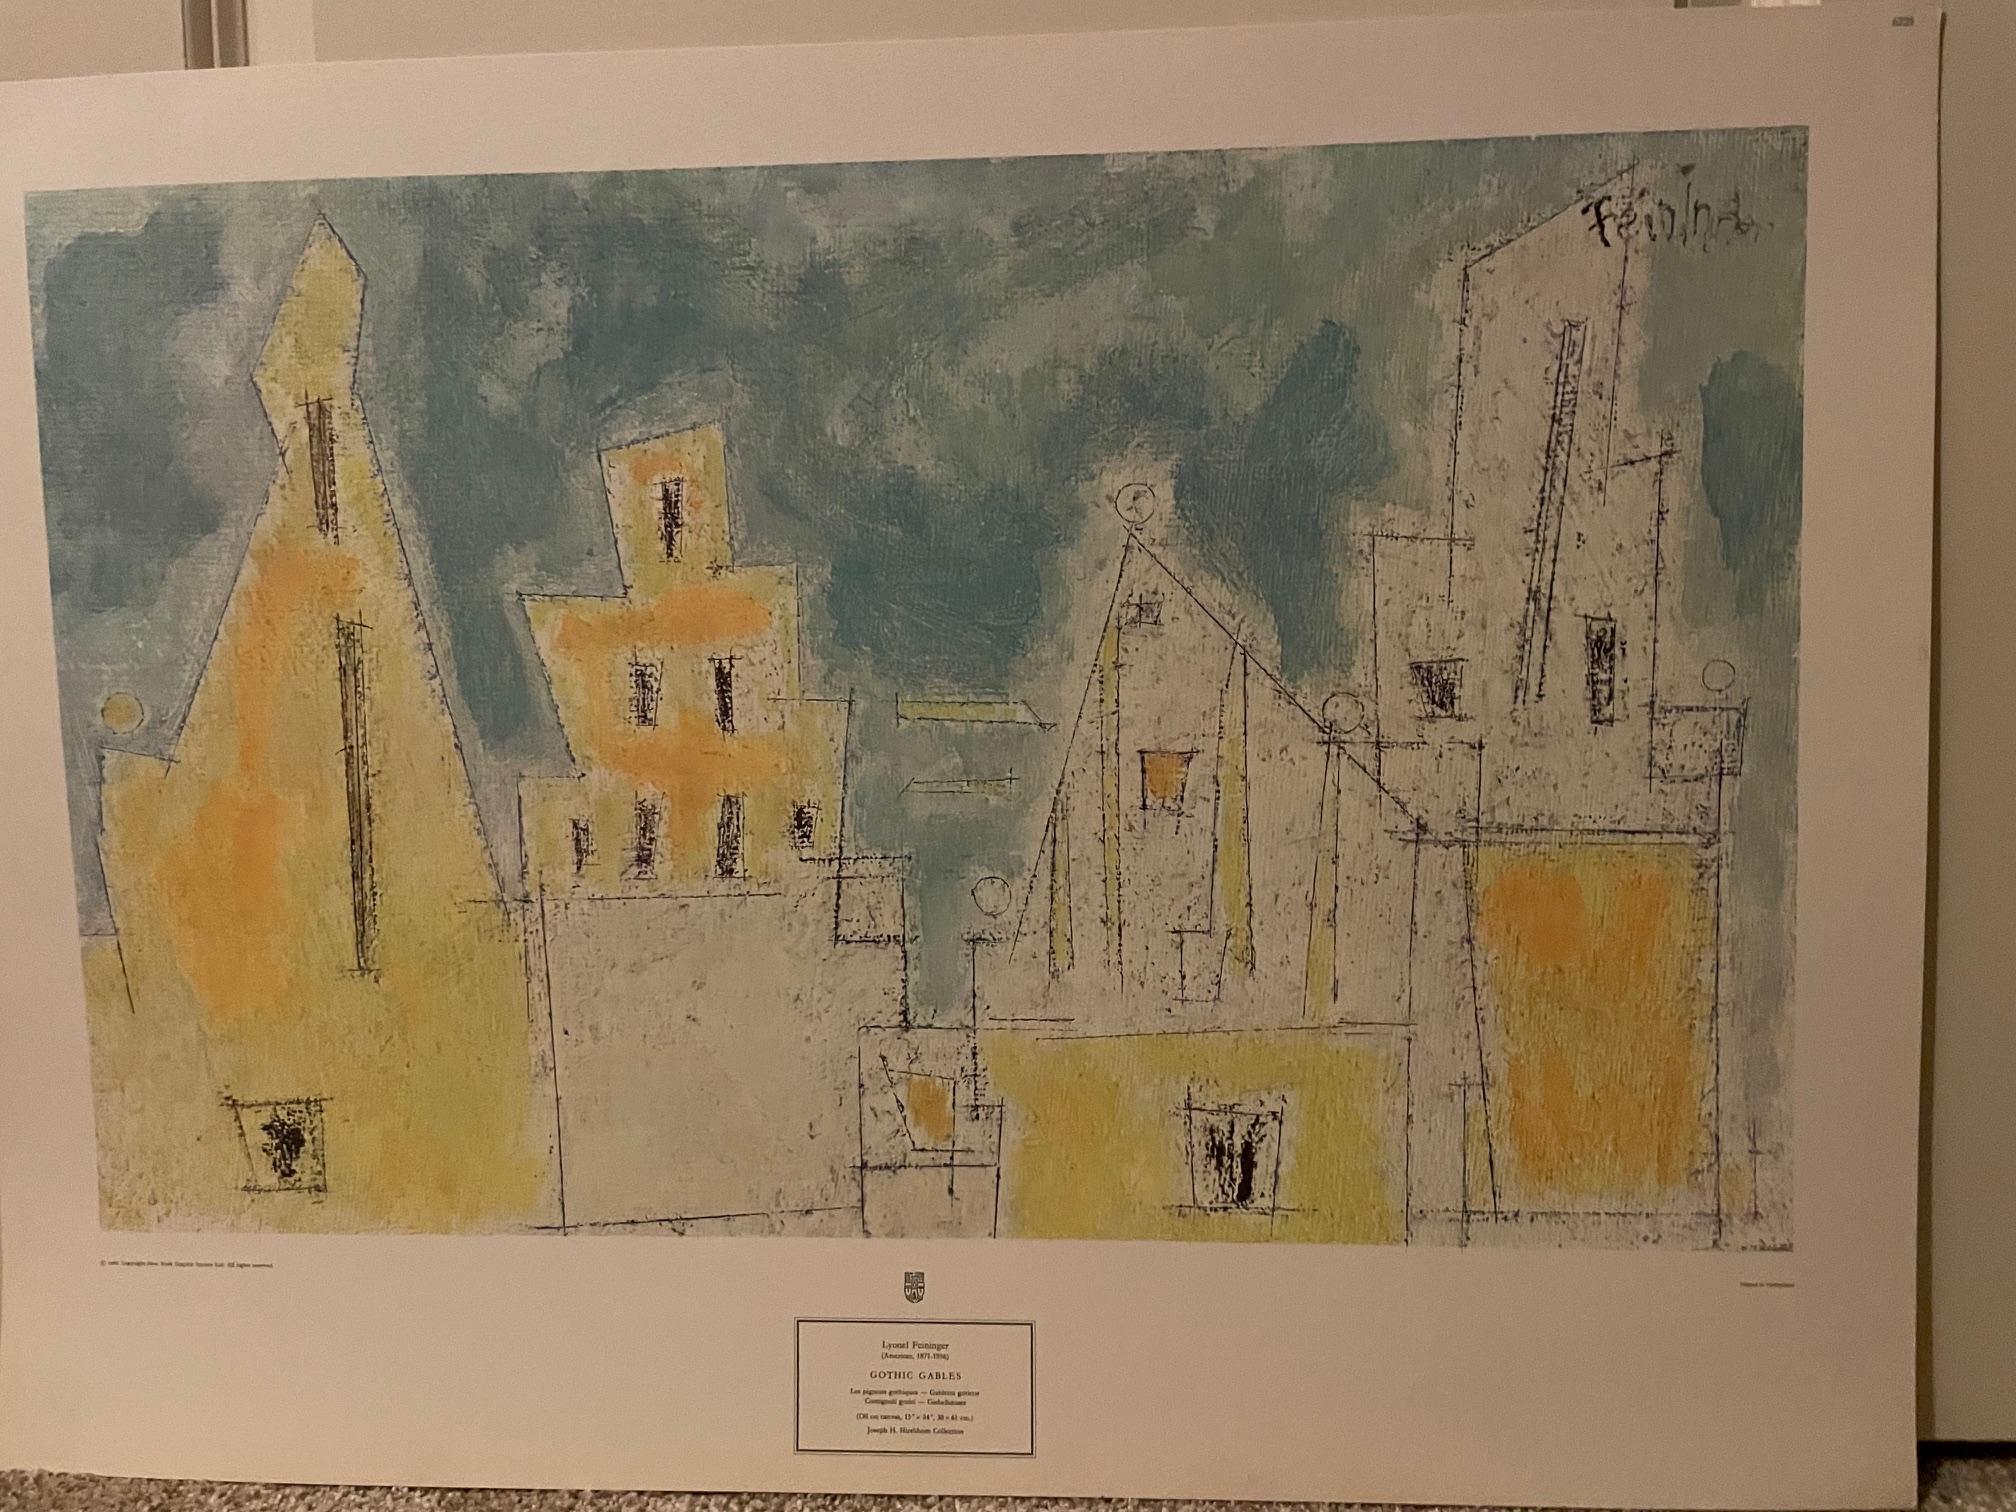 Unknown Abstract Print - "Gothic Gable" by American artist Lyonel Feininger